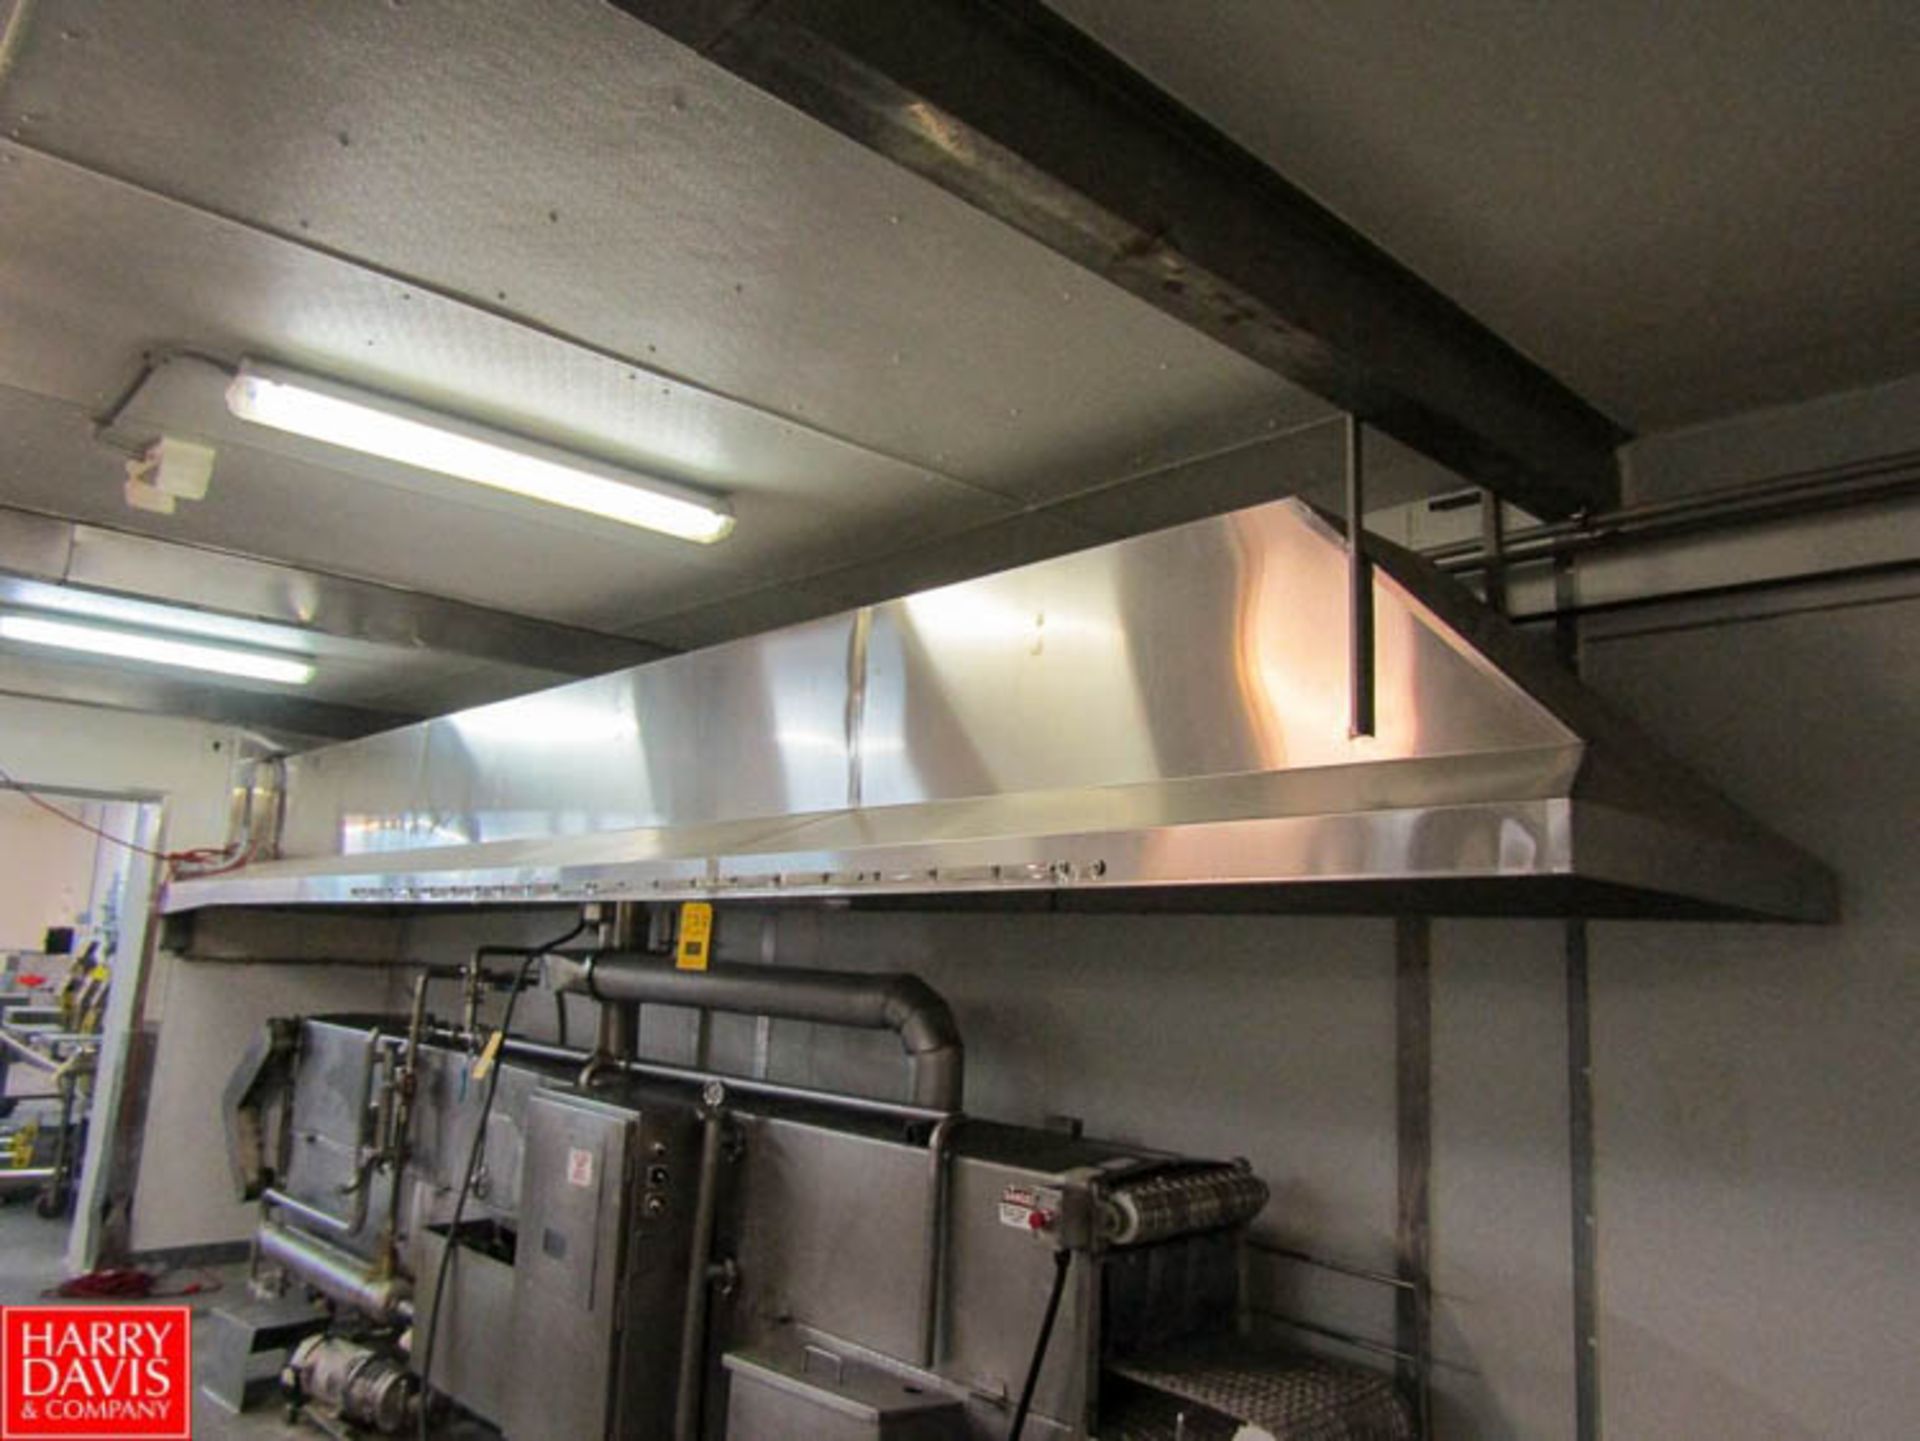 S/S Exhaust Hood Dimensions = 23' x 4' Rigging Fee: $ 300